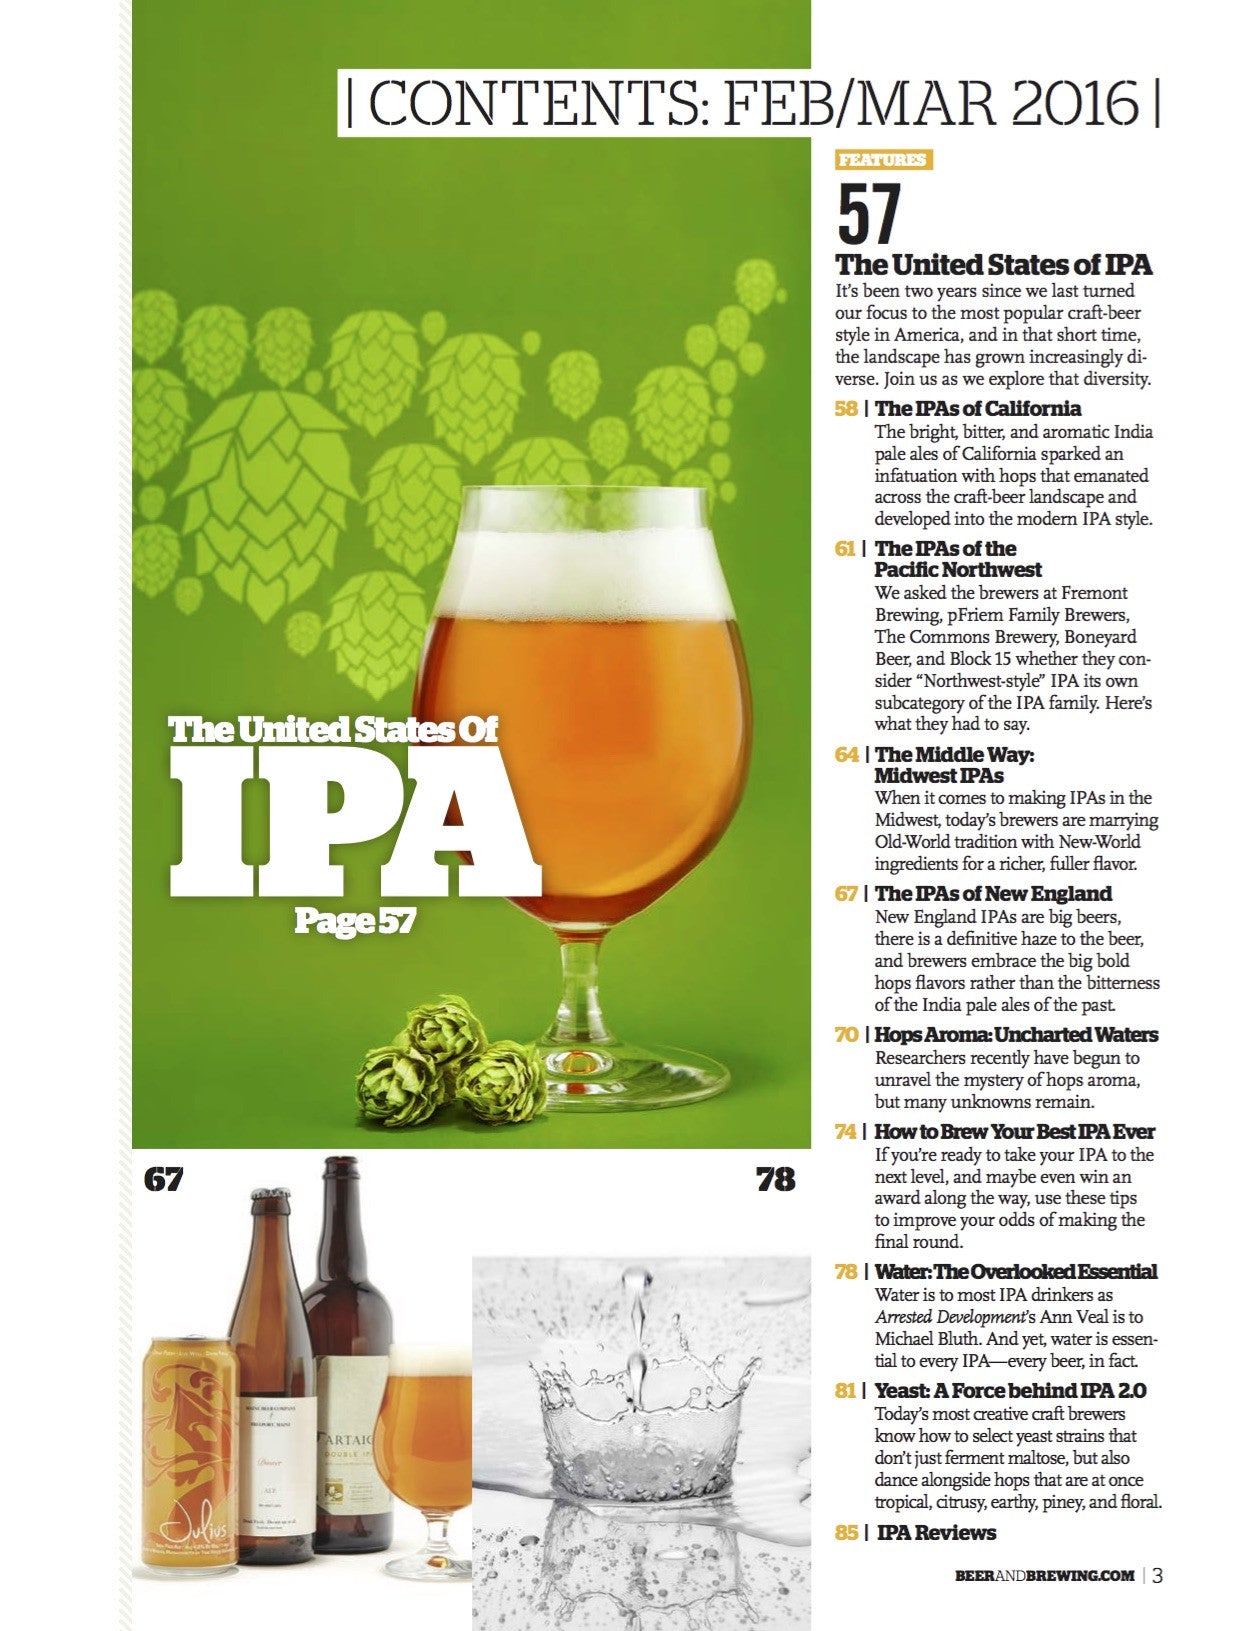 February-March 2016 Issue (United States of IPA) - Craft Beer & Brewing